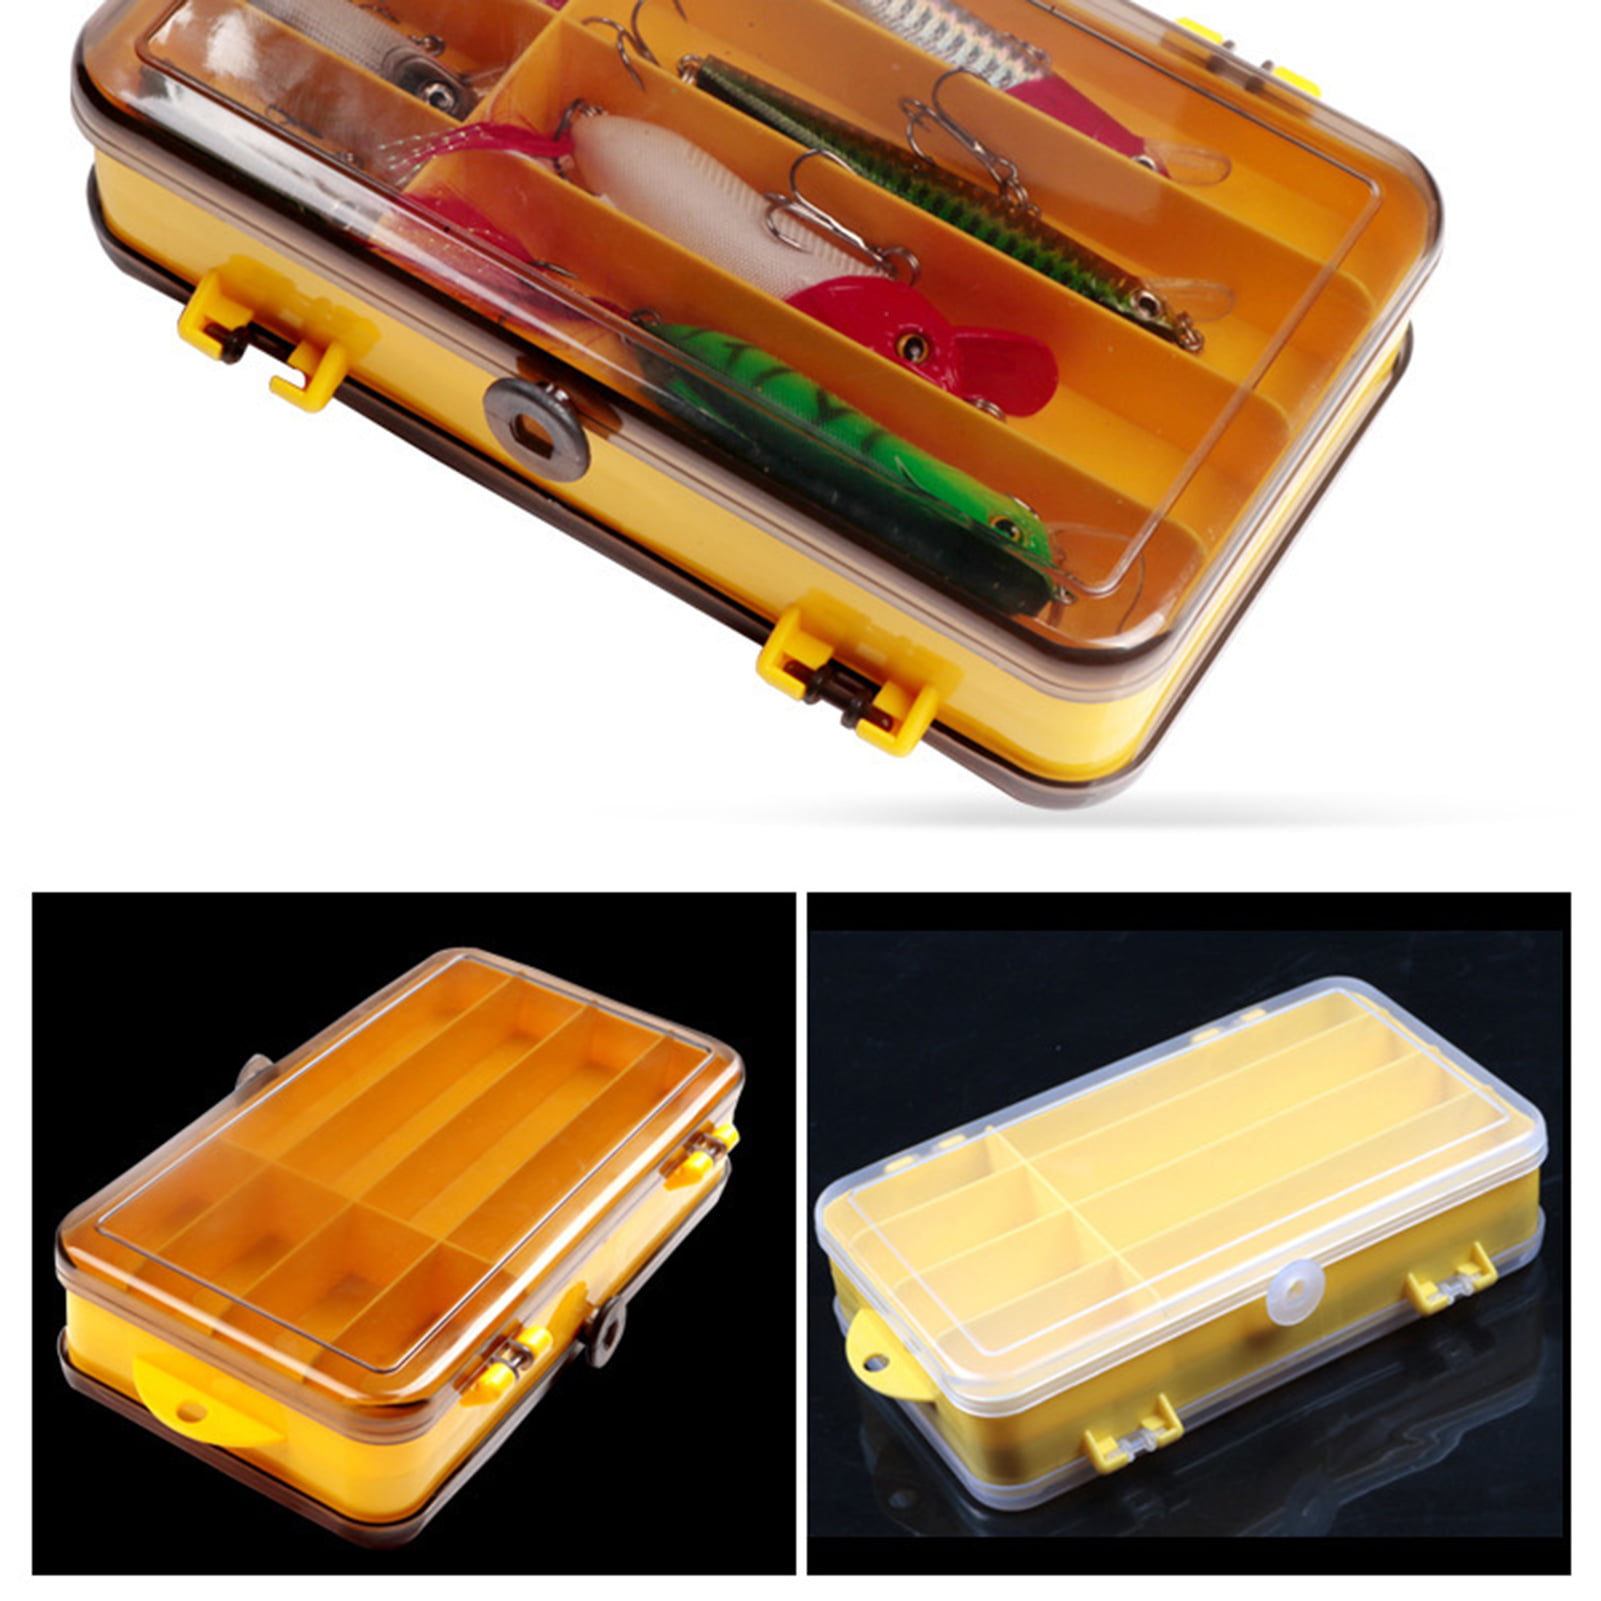 Details about   Fishing Bait Tackle Box Fishing Tools Portable Waist Hang Fishing Lure Container 